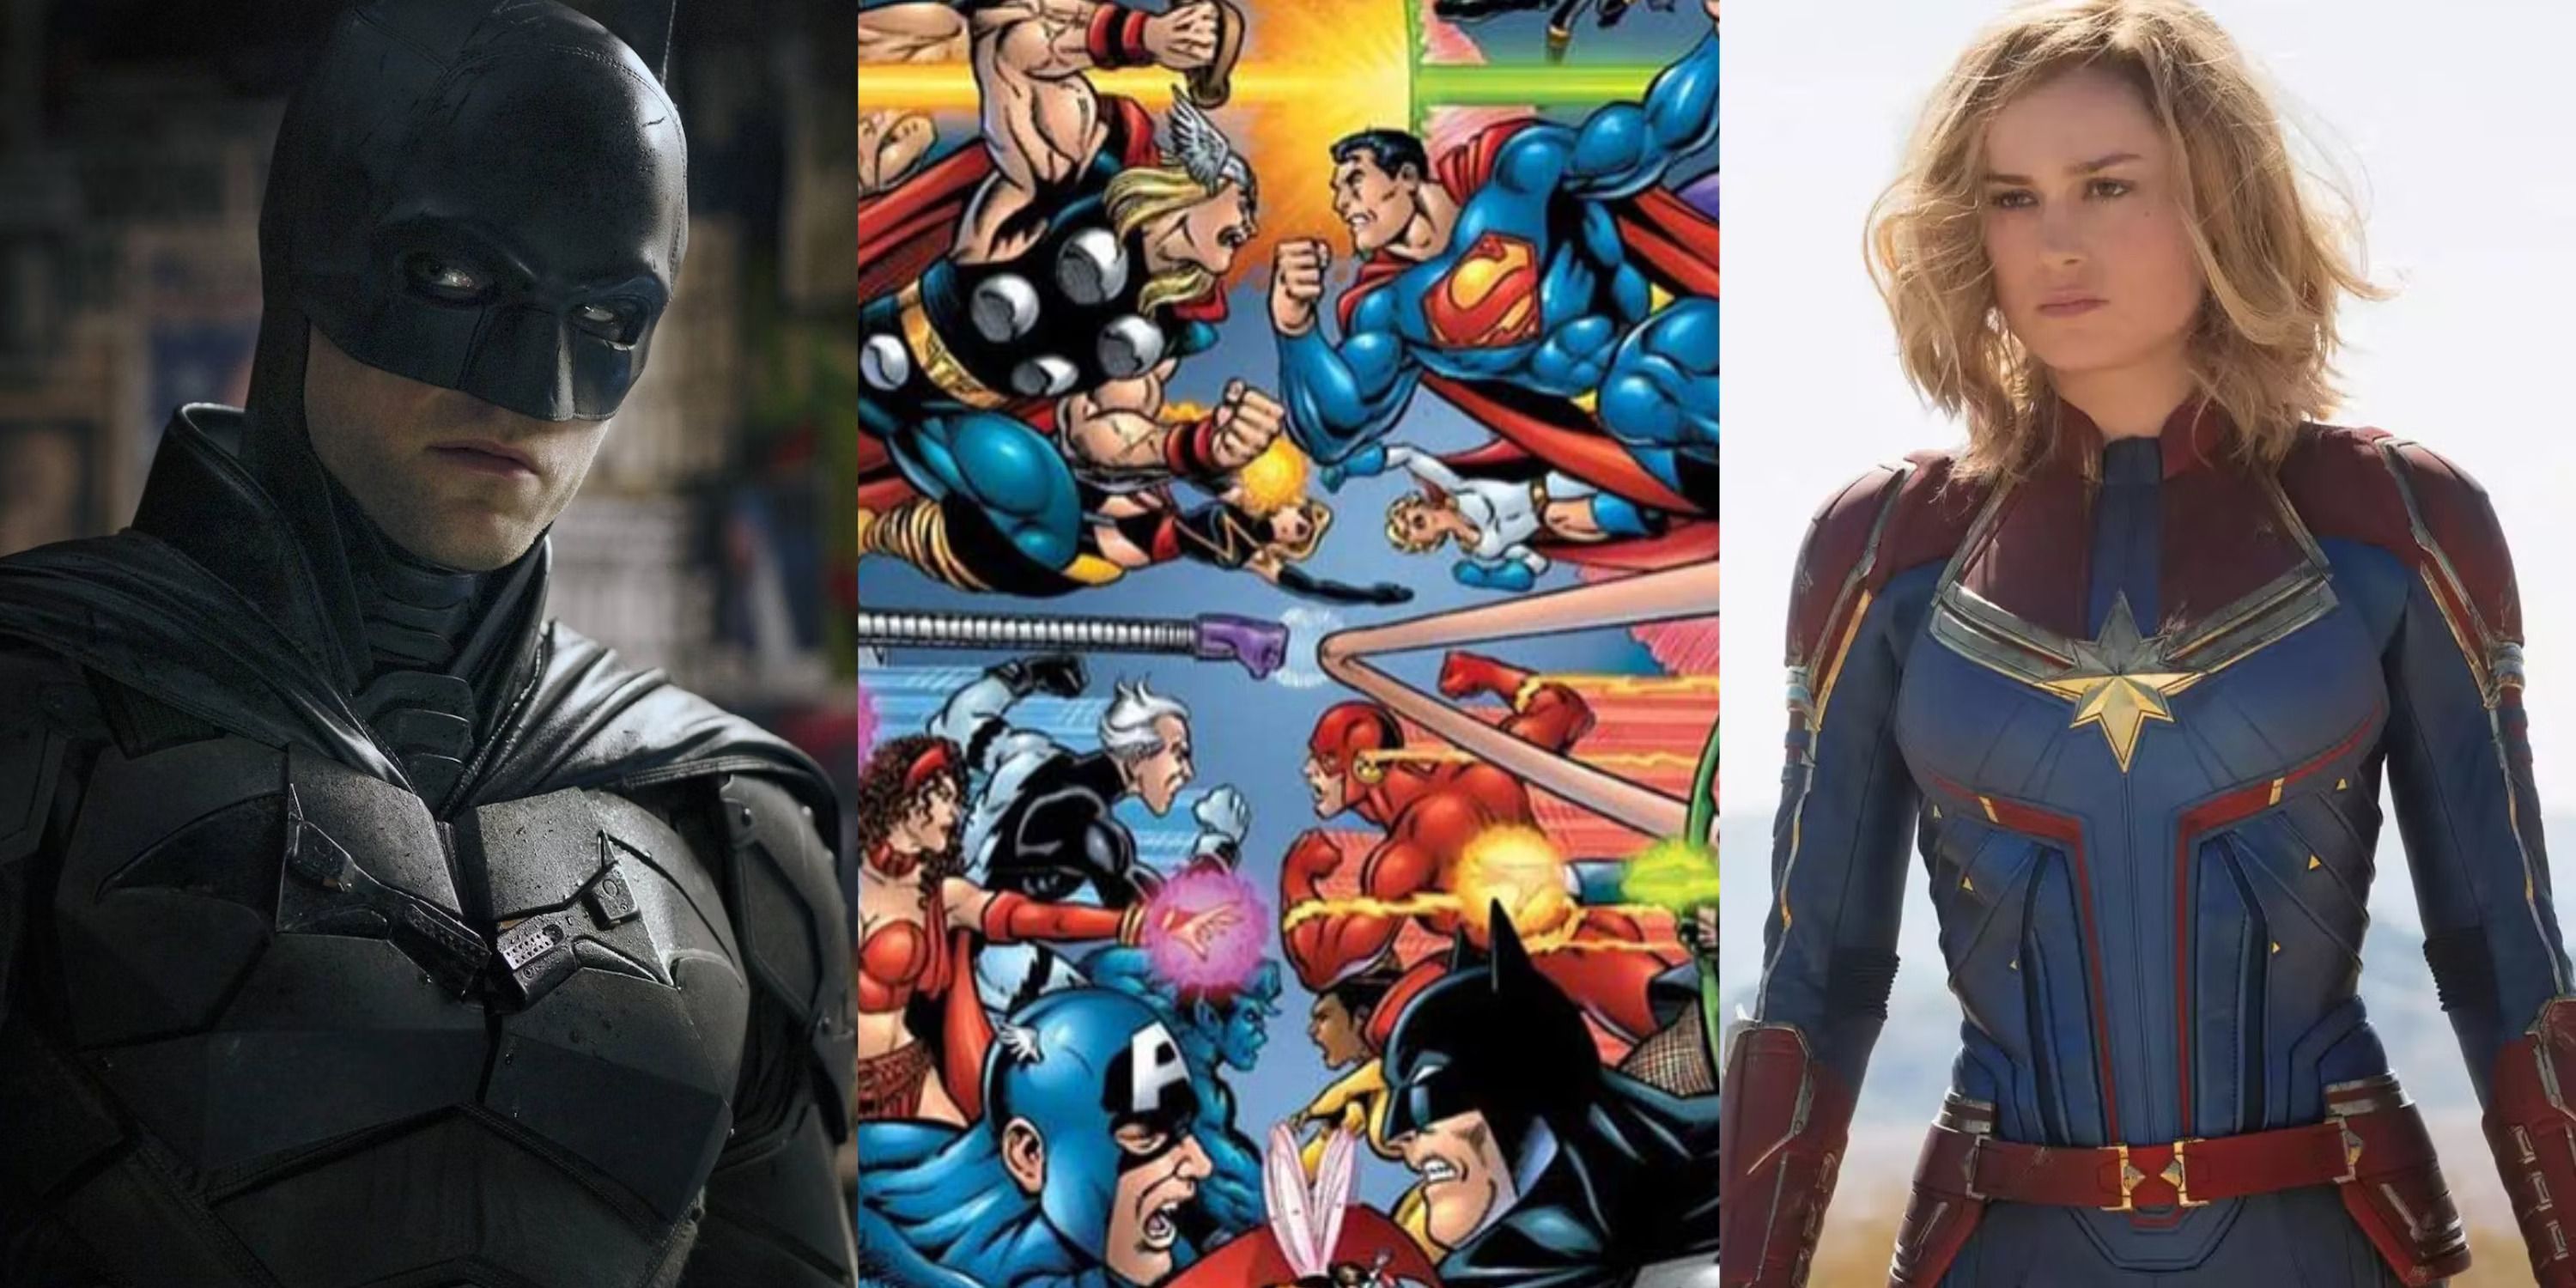 A split image of Batman, the Avengers fighting the Justice League, and of Captain Marvel